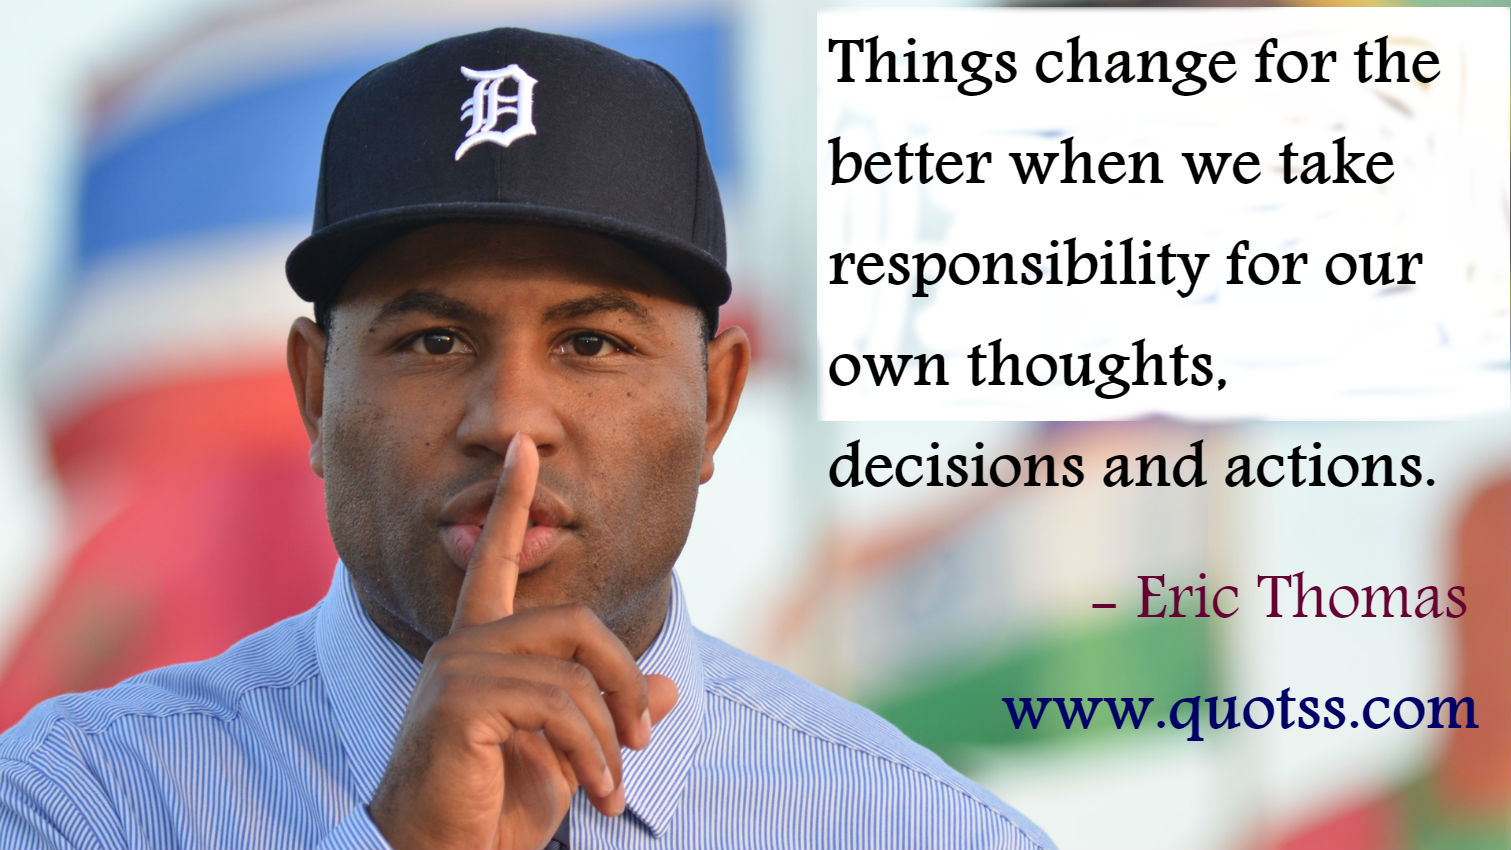 Image Quote on Quotss - Things change for the better when we take responsibility for our own thoughts, decisions and actions. by